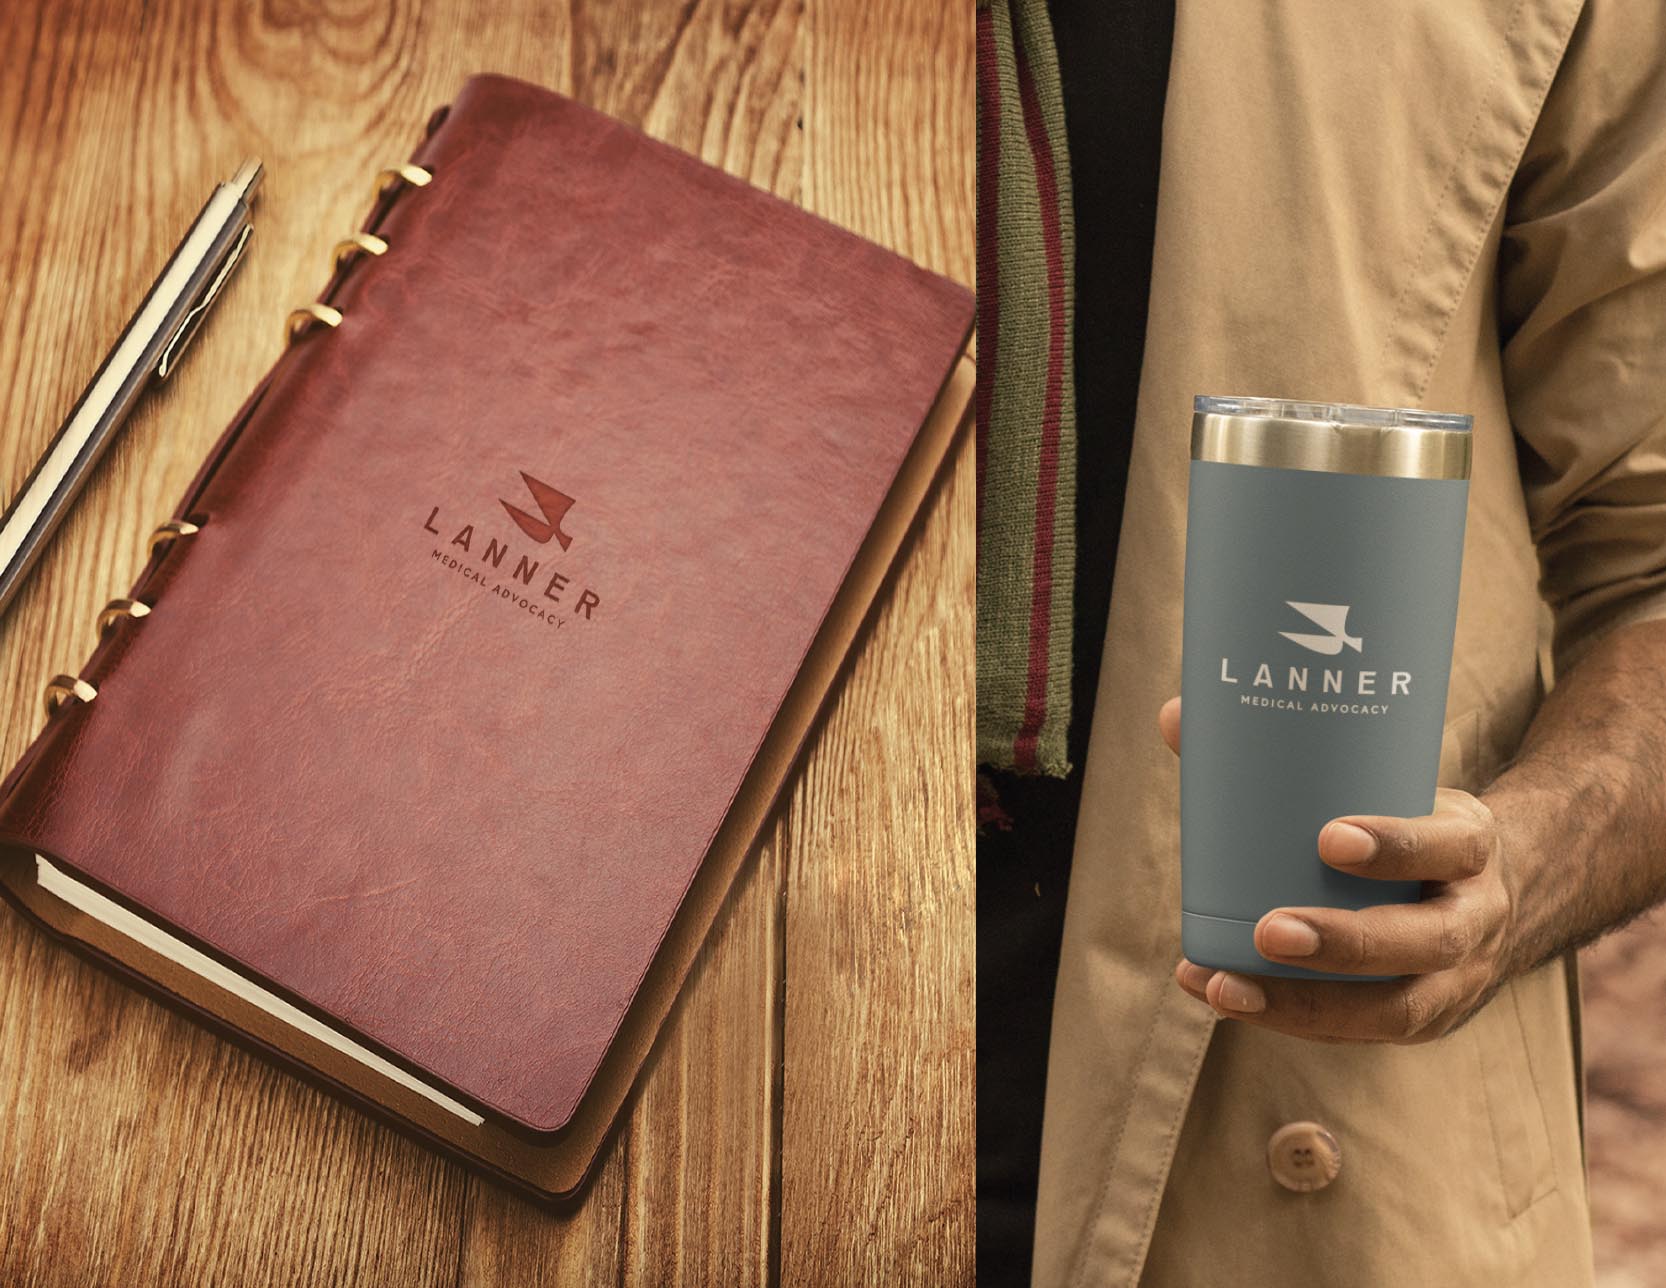 Lanner's logo, a geometric shape based on a bird, is displayed on a leather notebook and metal travel mug.